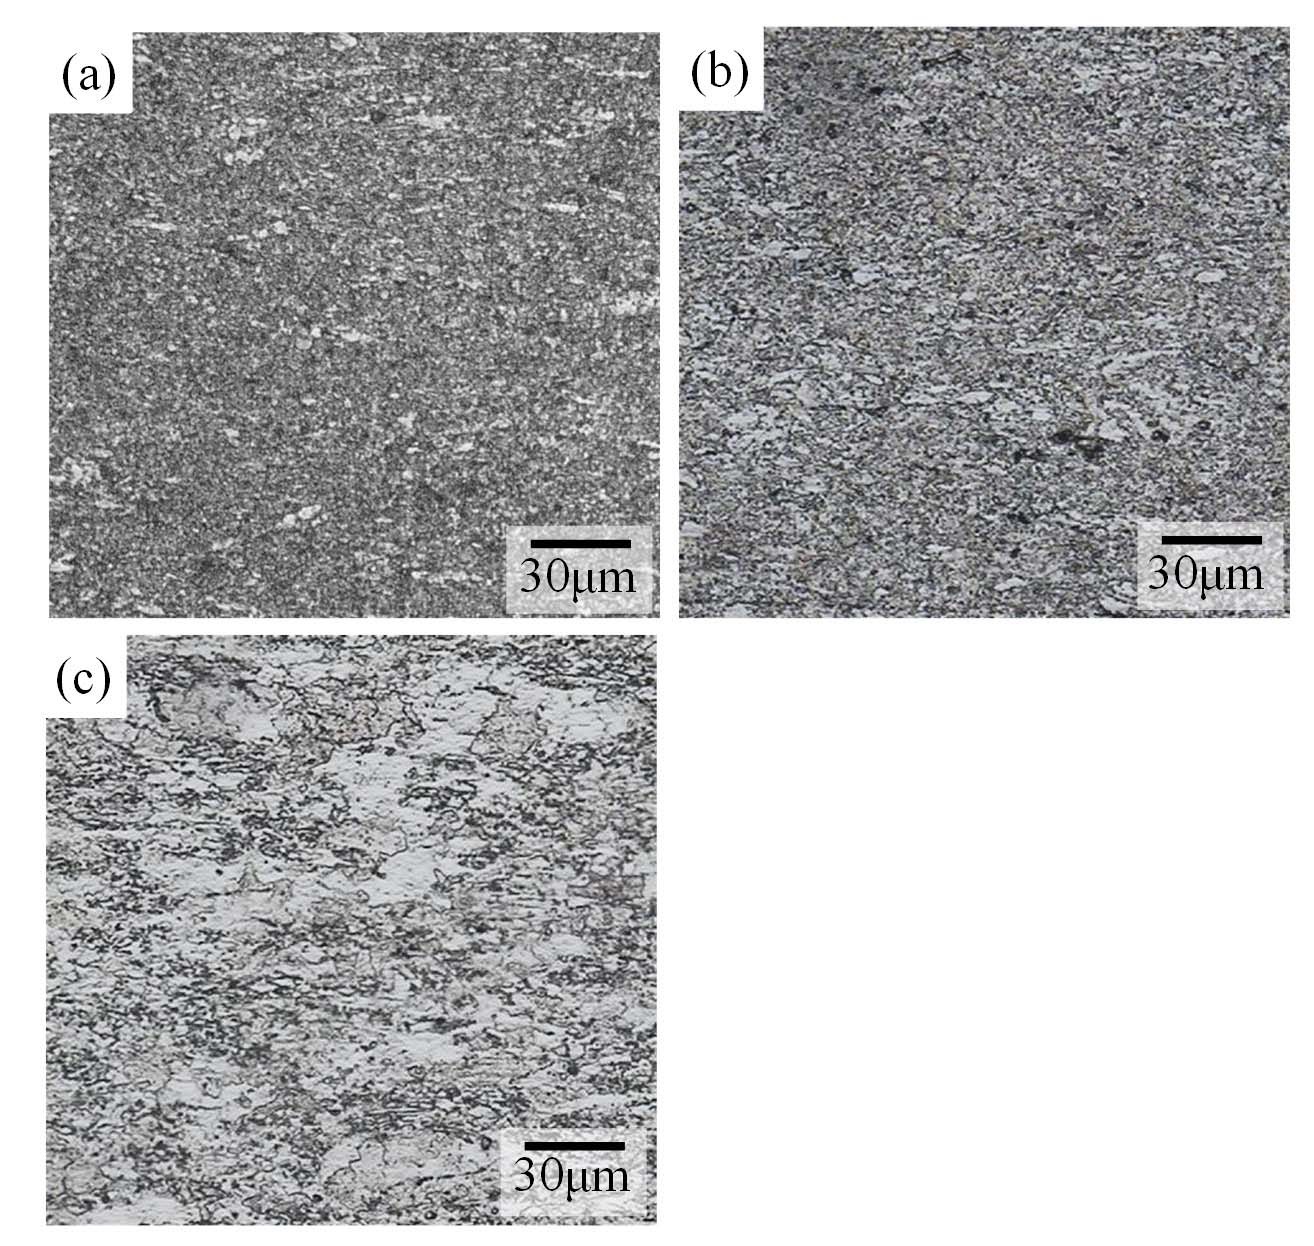 Optical Micrographs of 10Cr ODS Steels in Various
Heat Treatments; (a) NT, (b) HR-T, and (c) FC.